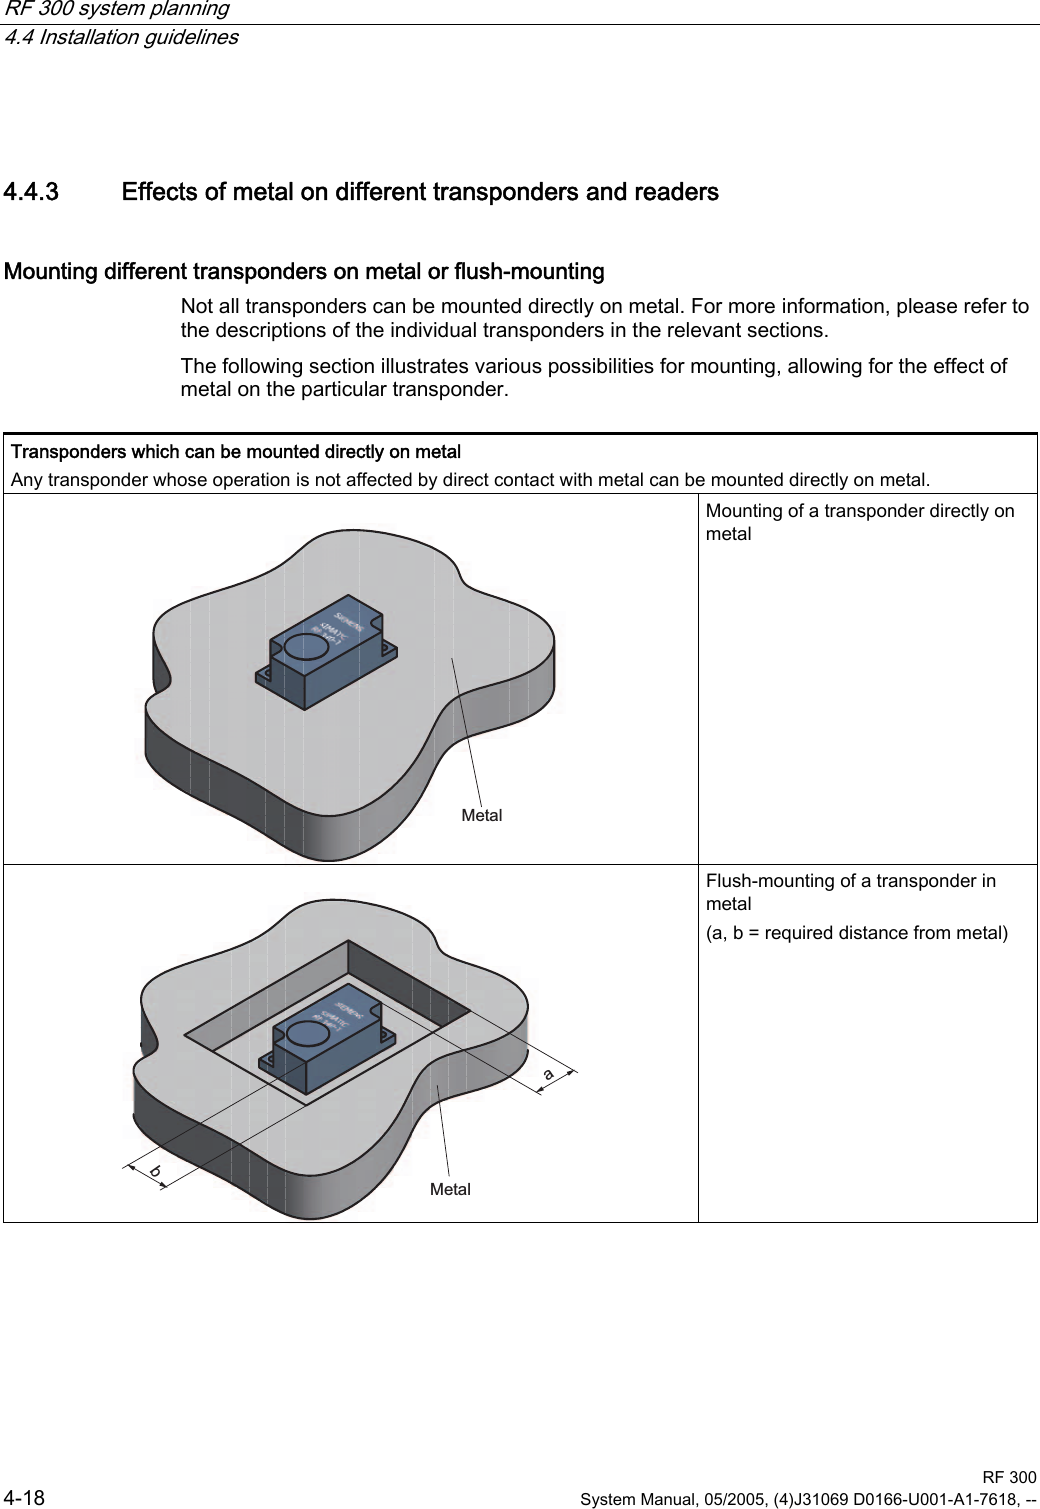 RF 300 system planning   4.4 Installation guidelines  RF 300 4-18  System Manual, 05/2005, (4)J31069 D0166-U001-A1-7618, -- 4.4.3  Effects of metal on different transponders and readers Mounting different transponders on metal or flush-mounting Not all transponders can be mounted directly on metal. For more information, please refer to the descriptions of the individual transponders in the relevant sections. The following section illustrates various possibilities for mounting, allowing for the effect of metal on the particular transponder.   Transponders which can be mounted directly on metal Any transponder whose operation is not affected by direct contact with metal can be mounted directly on metal.  0HWDO Mounting of a transponder directly on metal  DE0HWDO Flush-mounting of a transponder in metal (a, b = required distance from metal)   